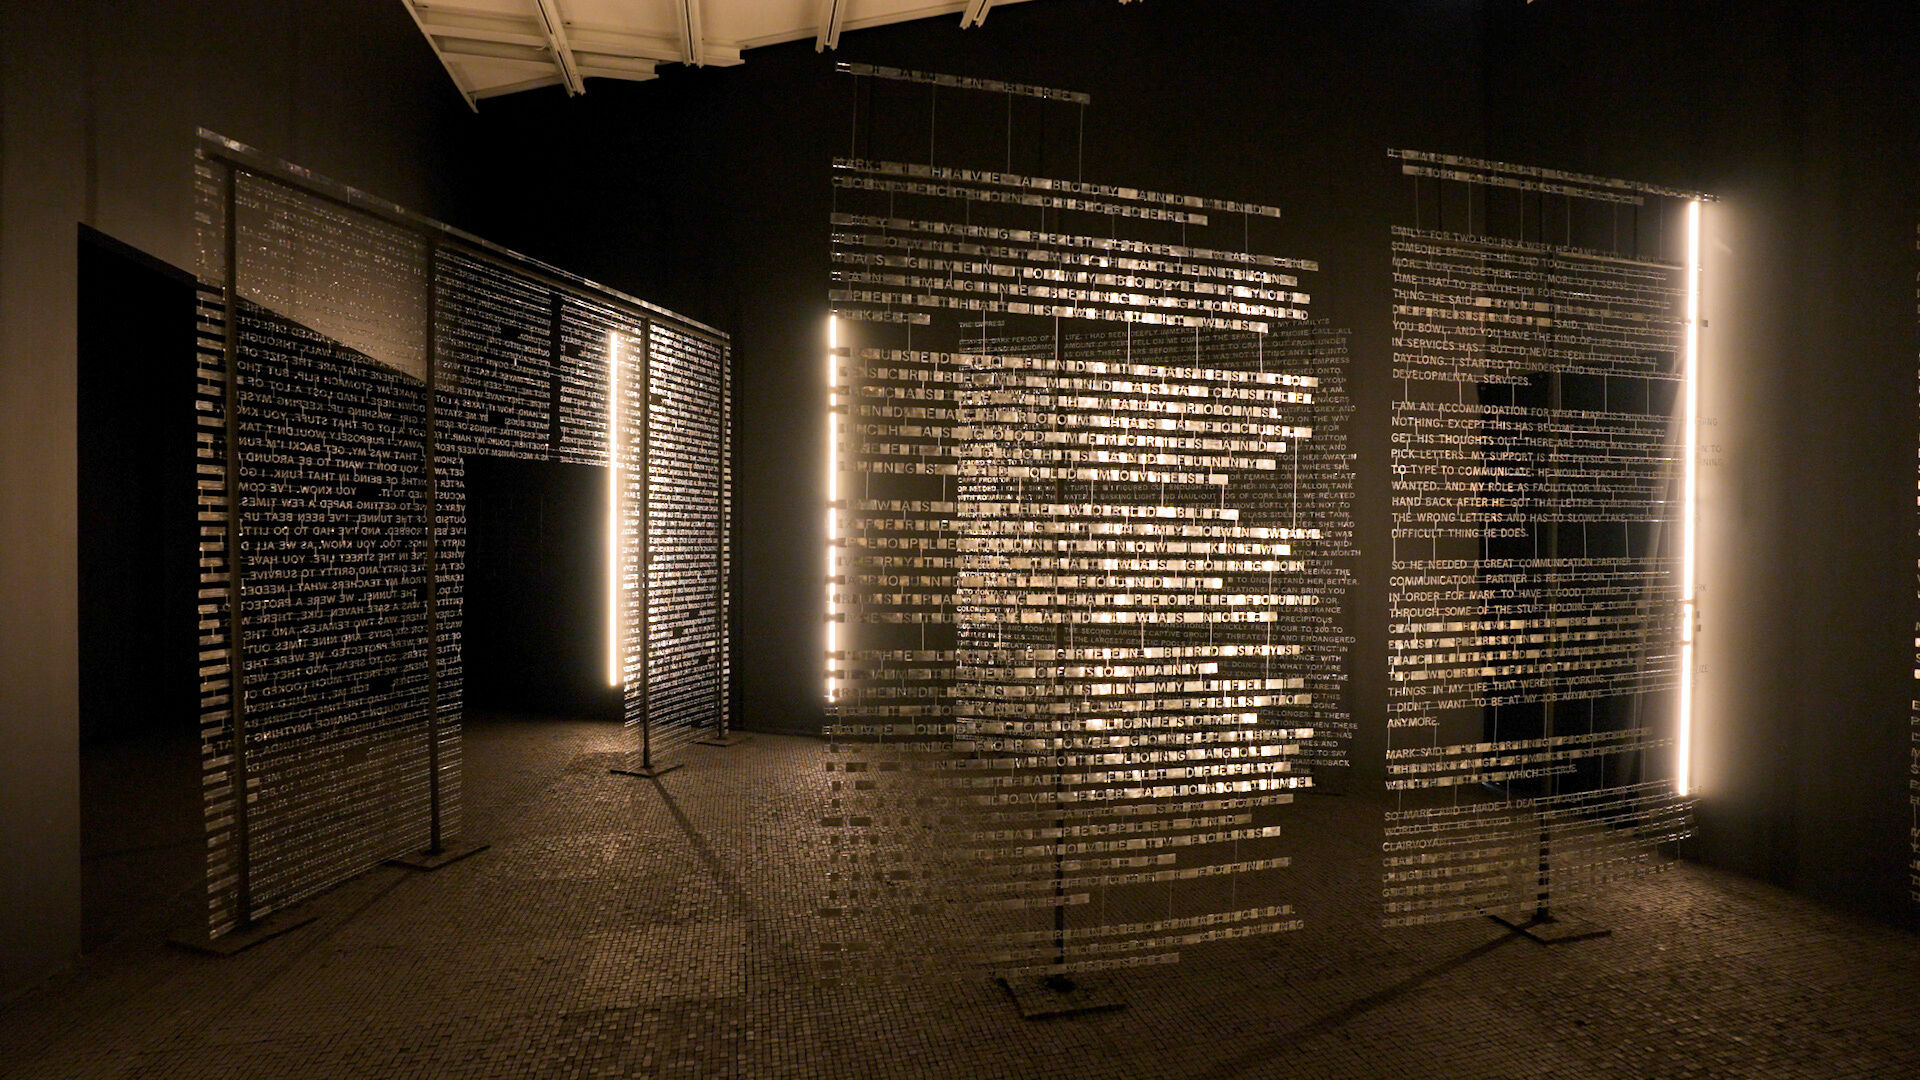 Many large transparent panels with metal, glowing text on top of them, as if floating in air